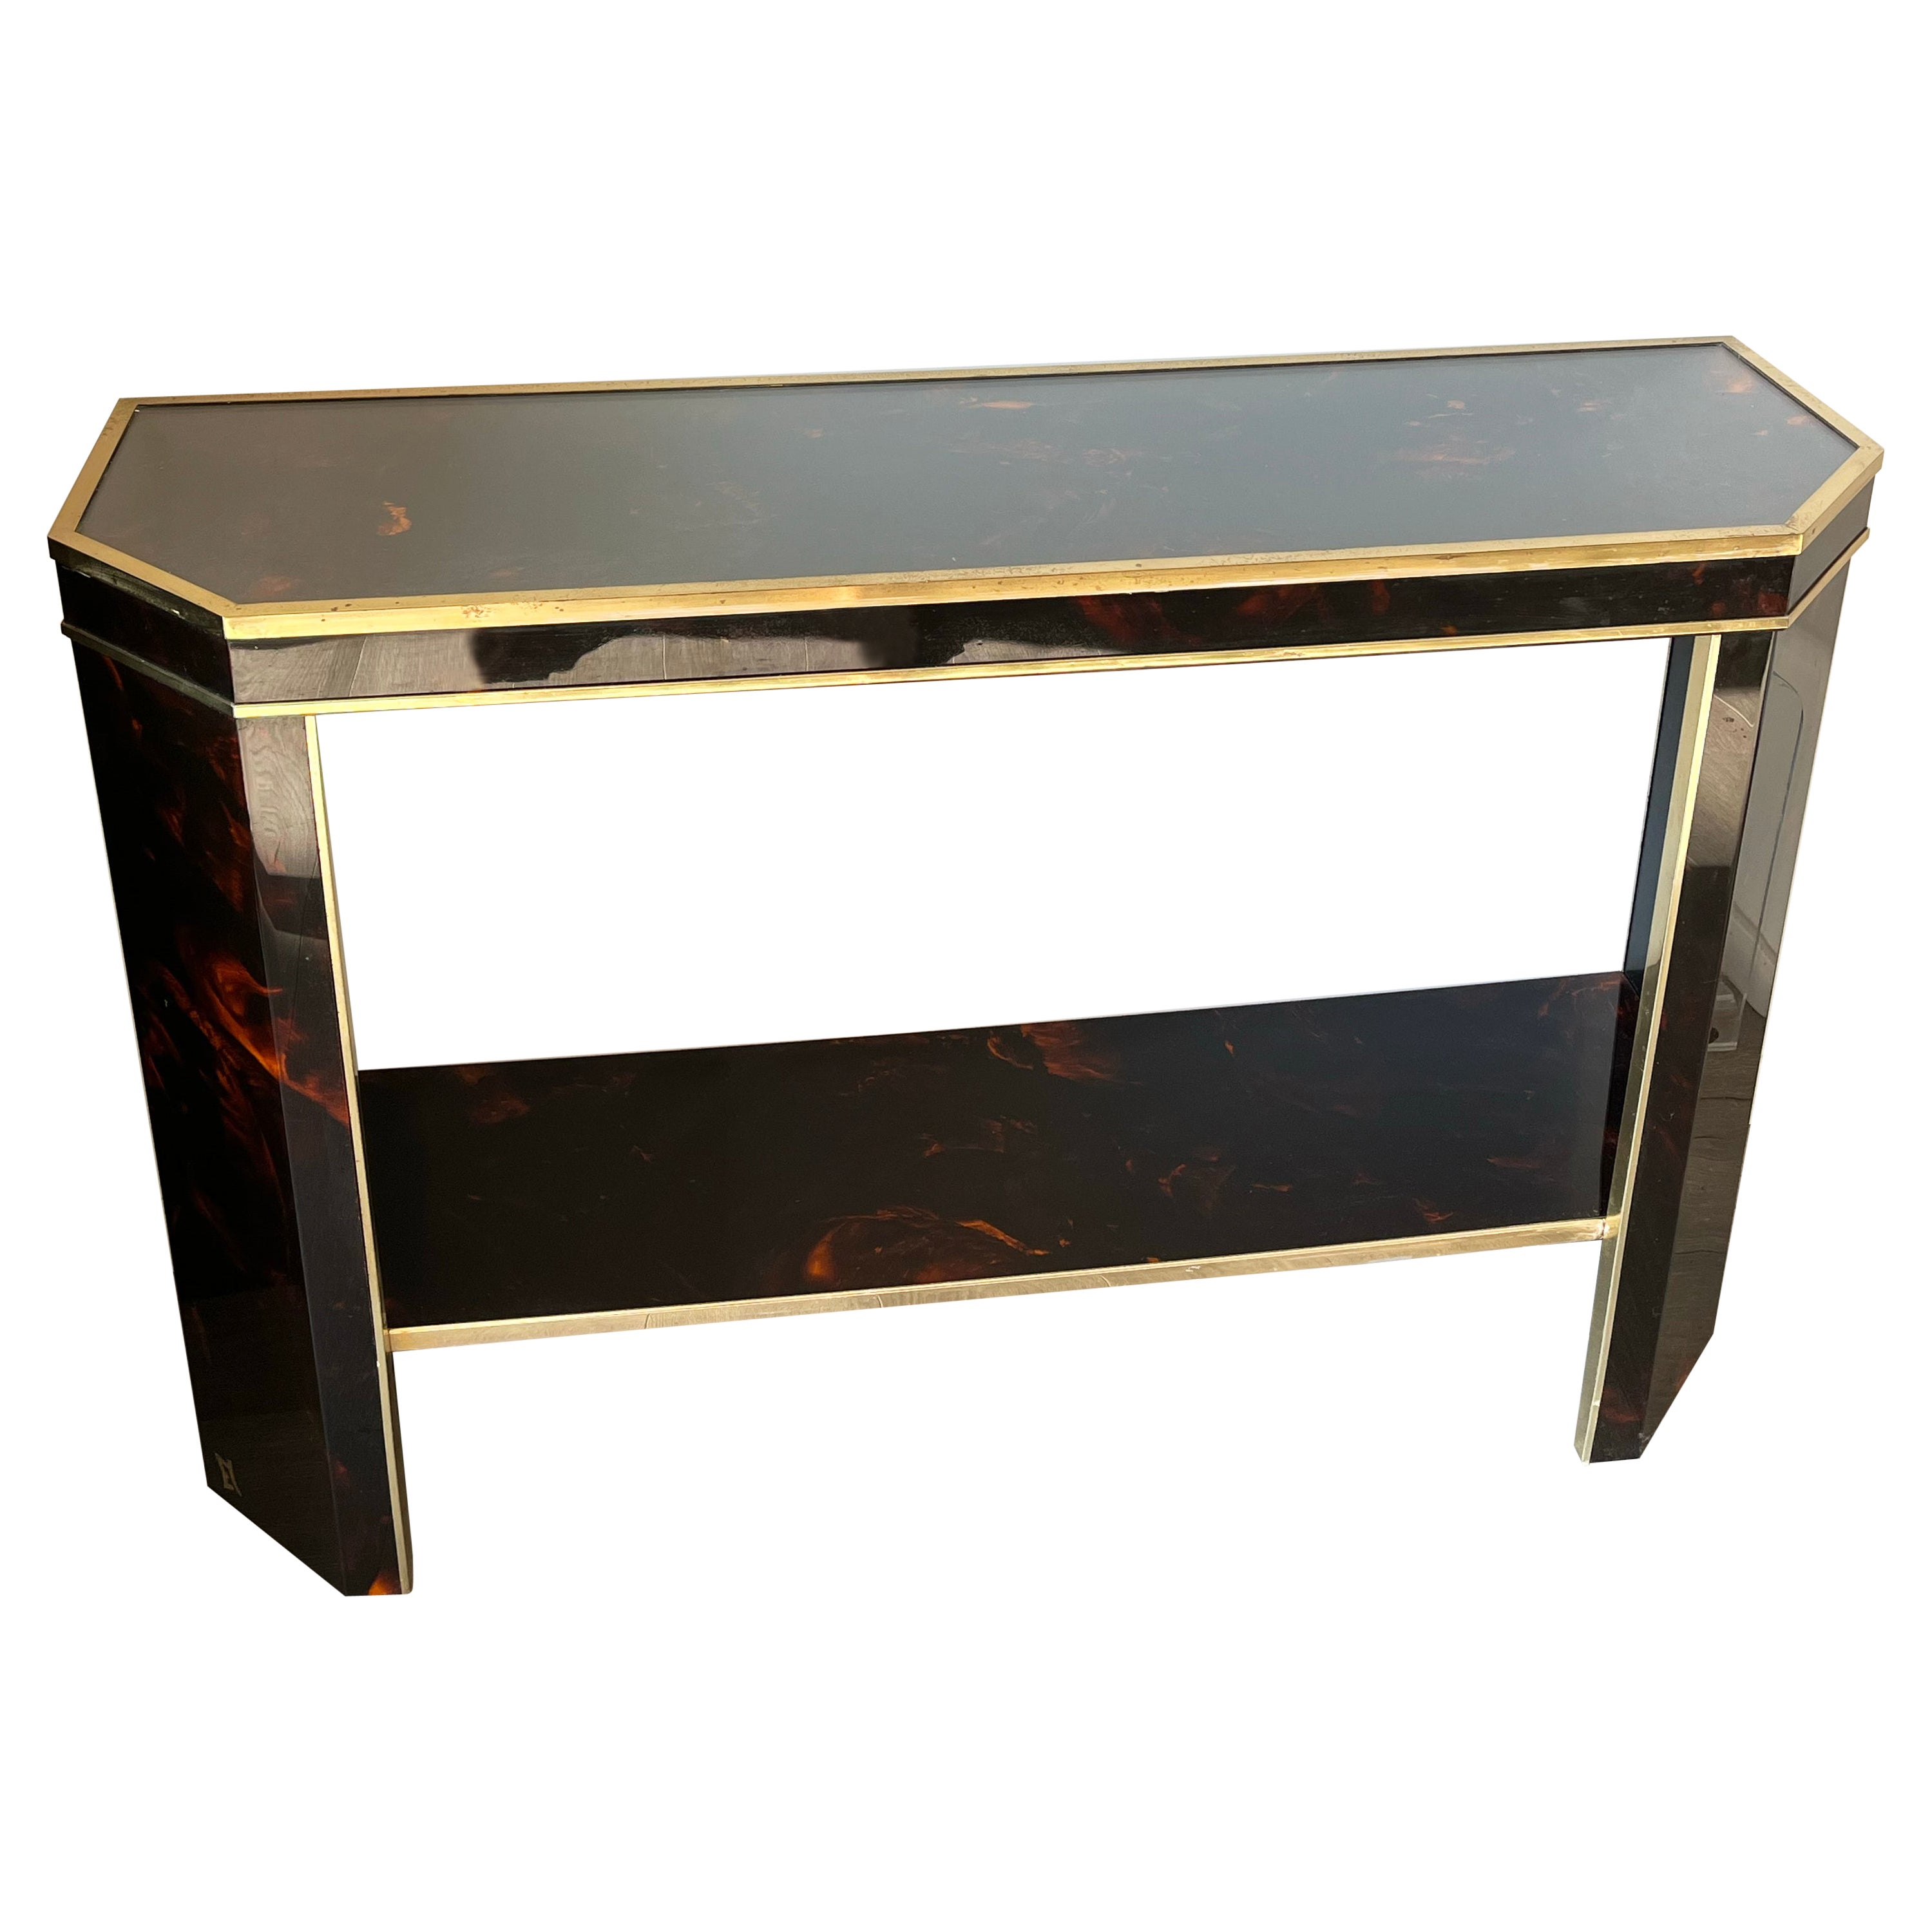 J.C. Mahey cherry red lacquer & brass console table, 1970s For Sale